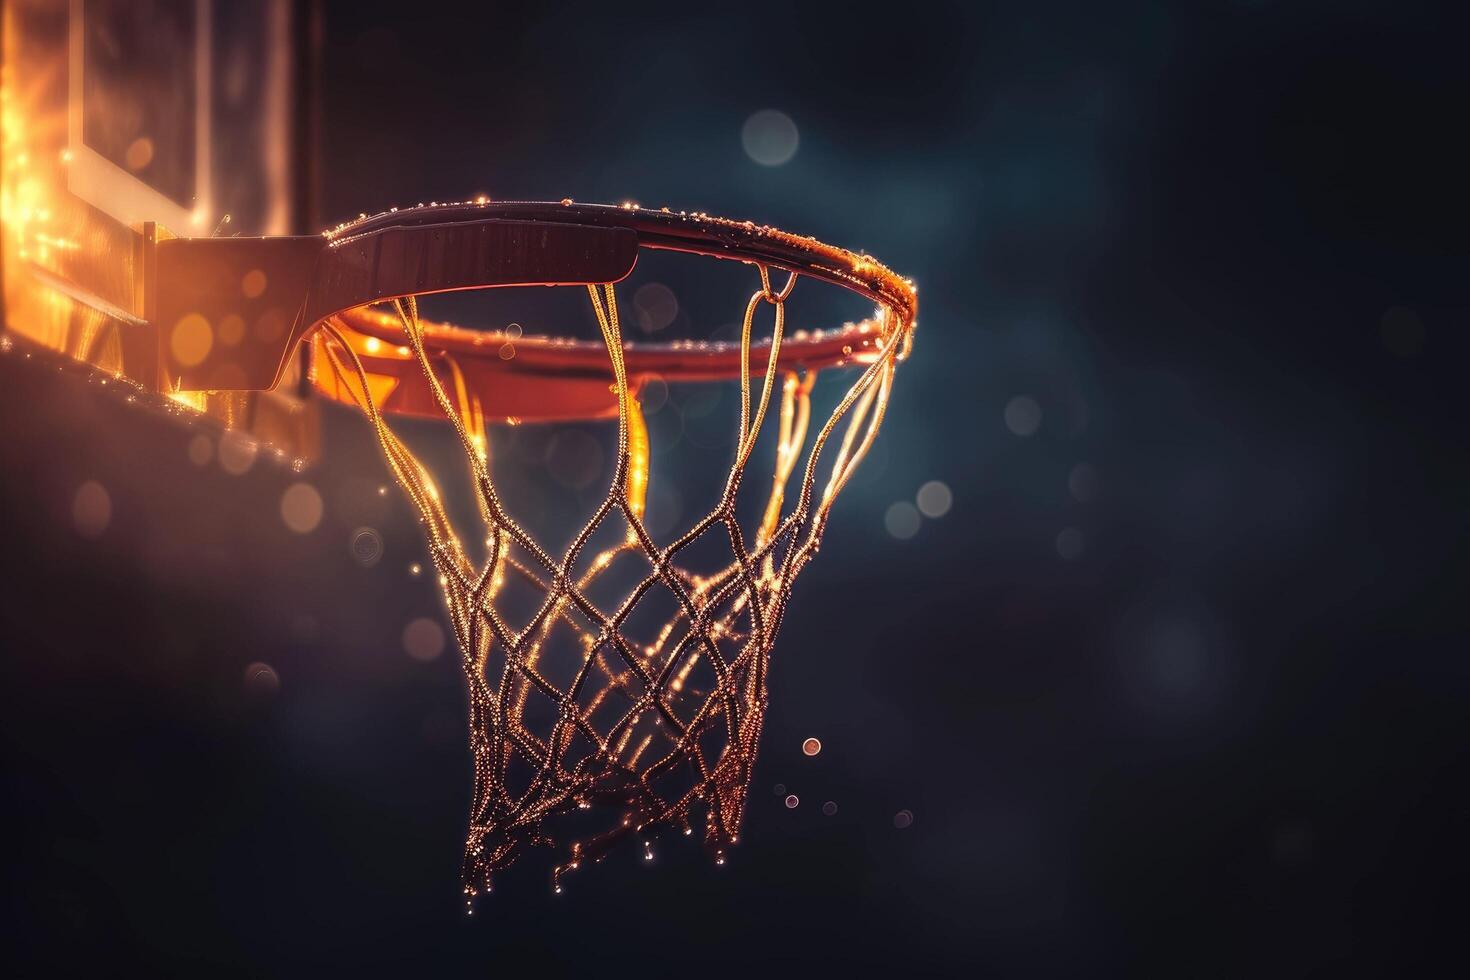 AI generated a basketball hoop with a net in the dark photo